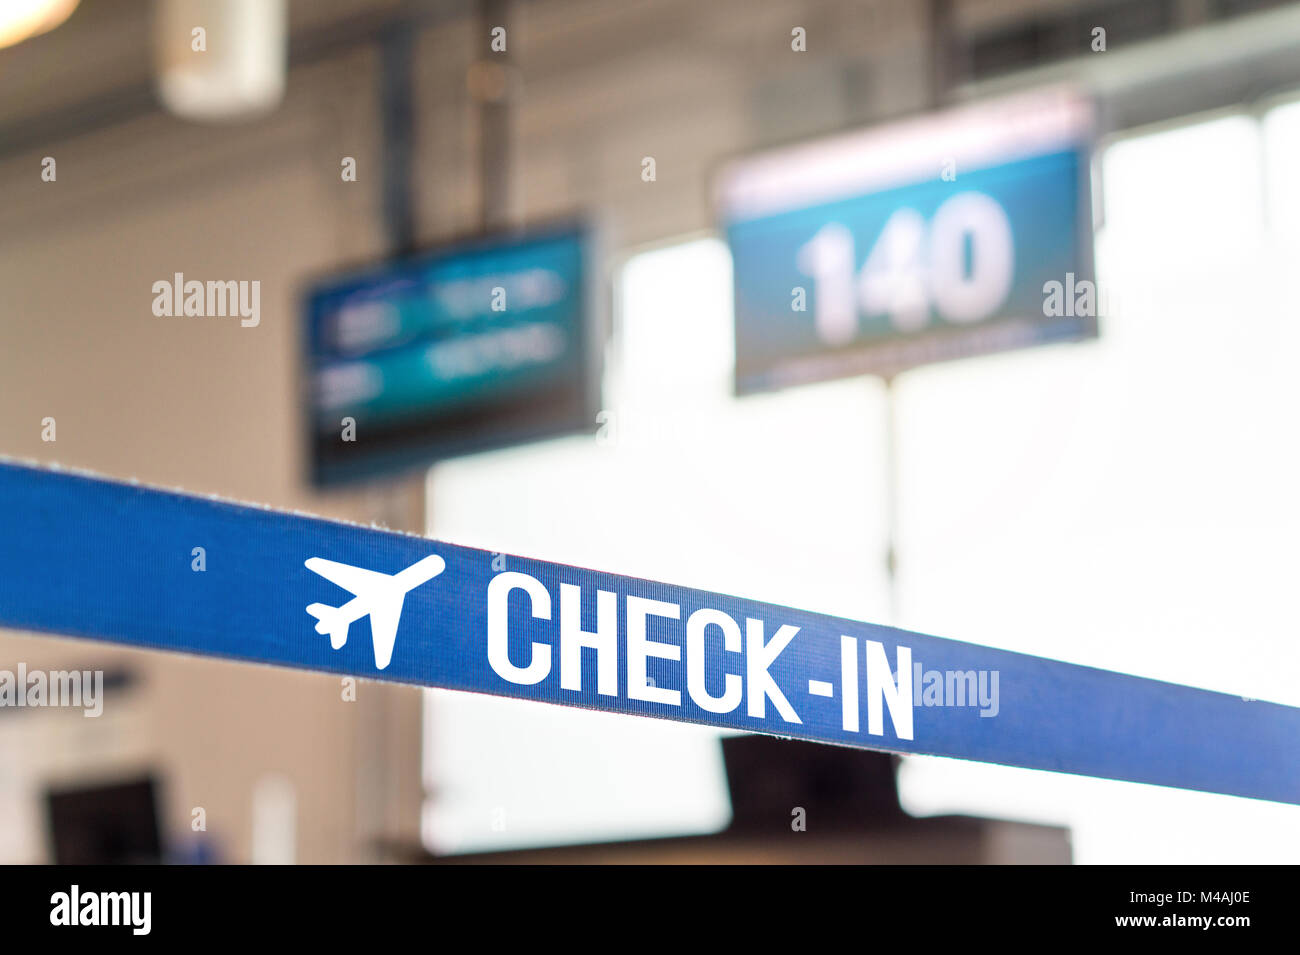 Check in desk at airport. Customer service counter in terminal. Stock Photo